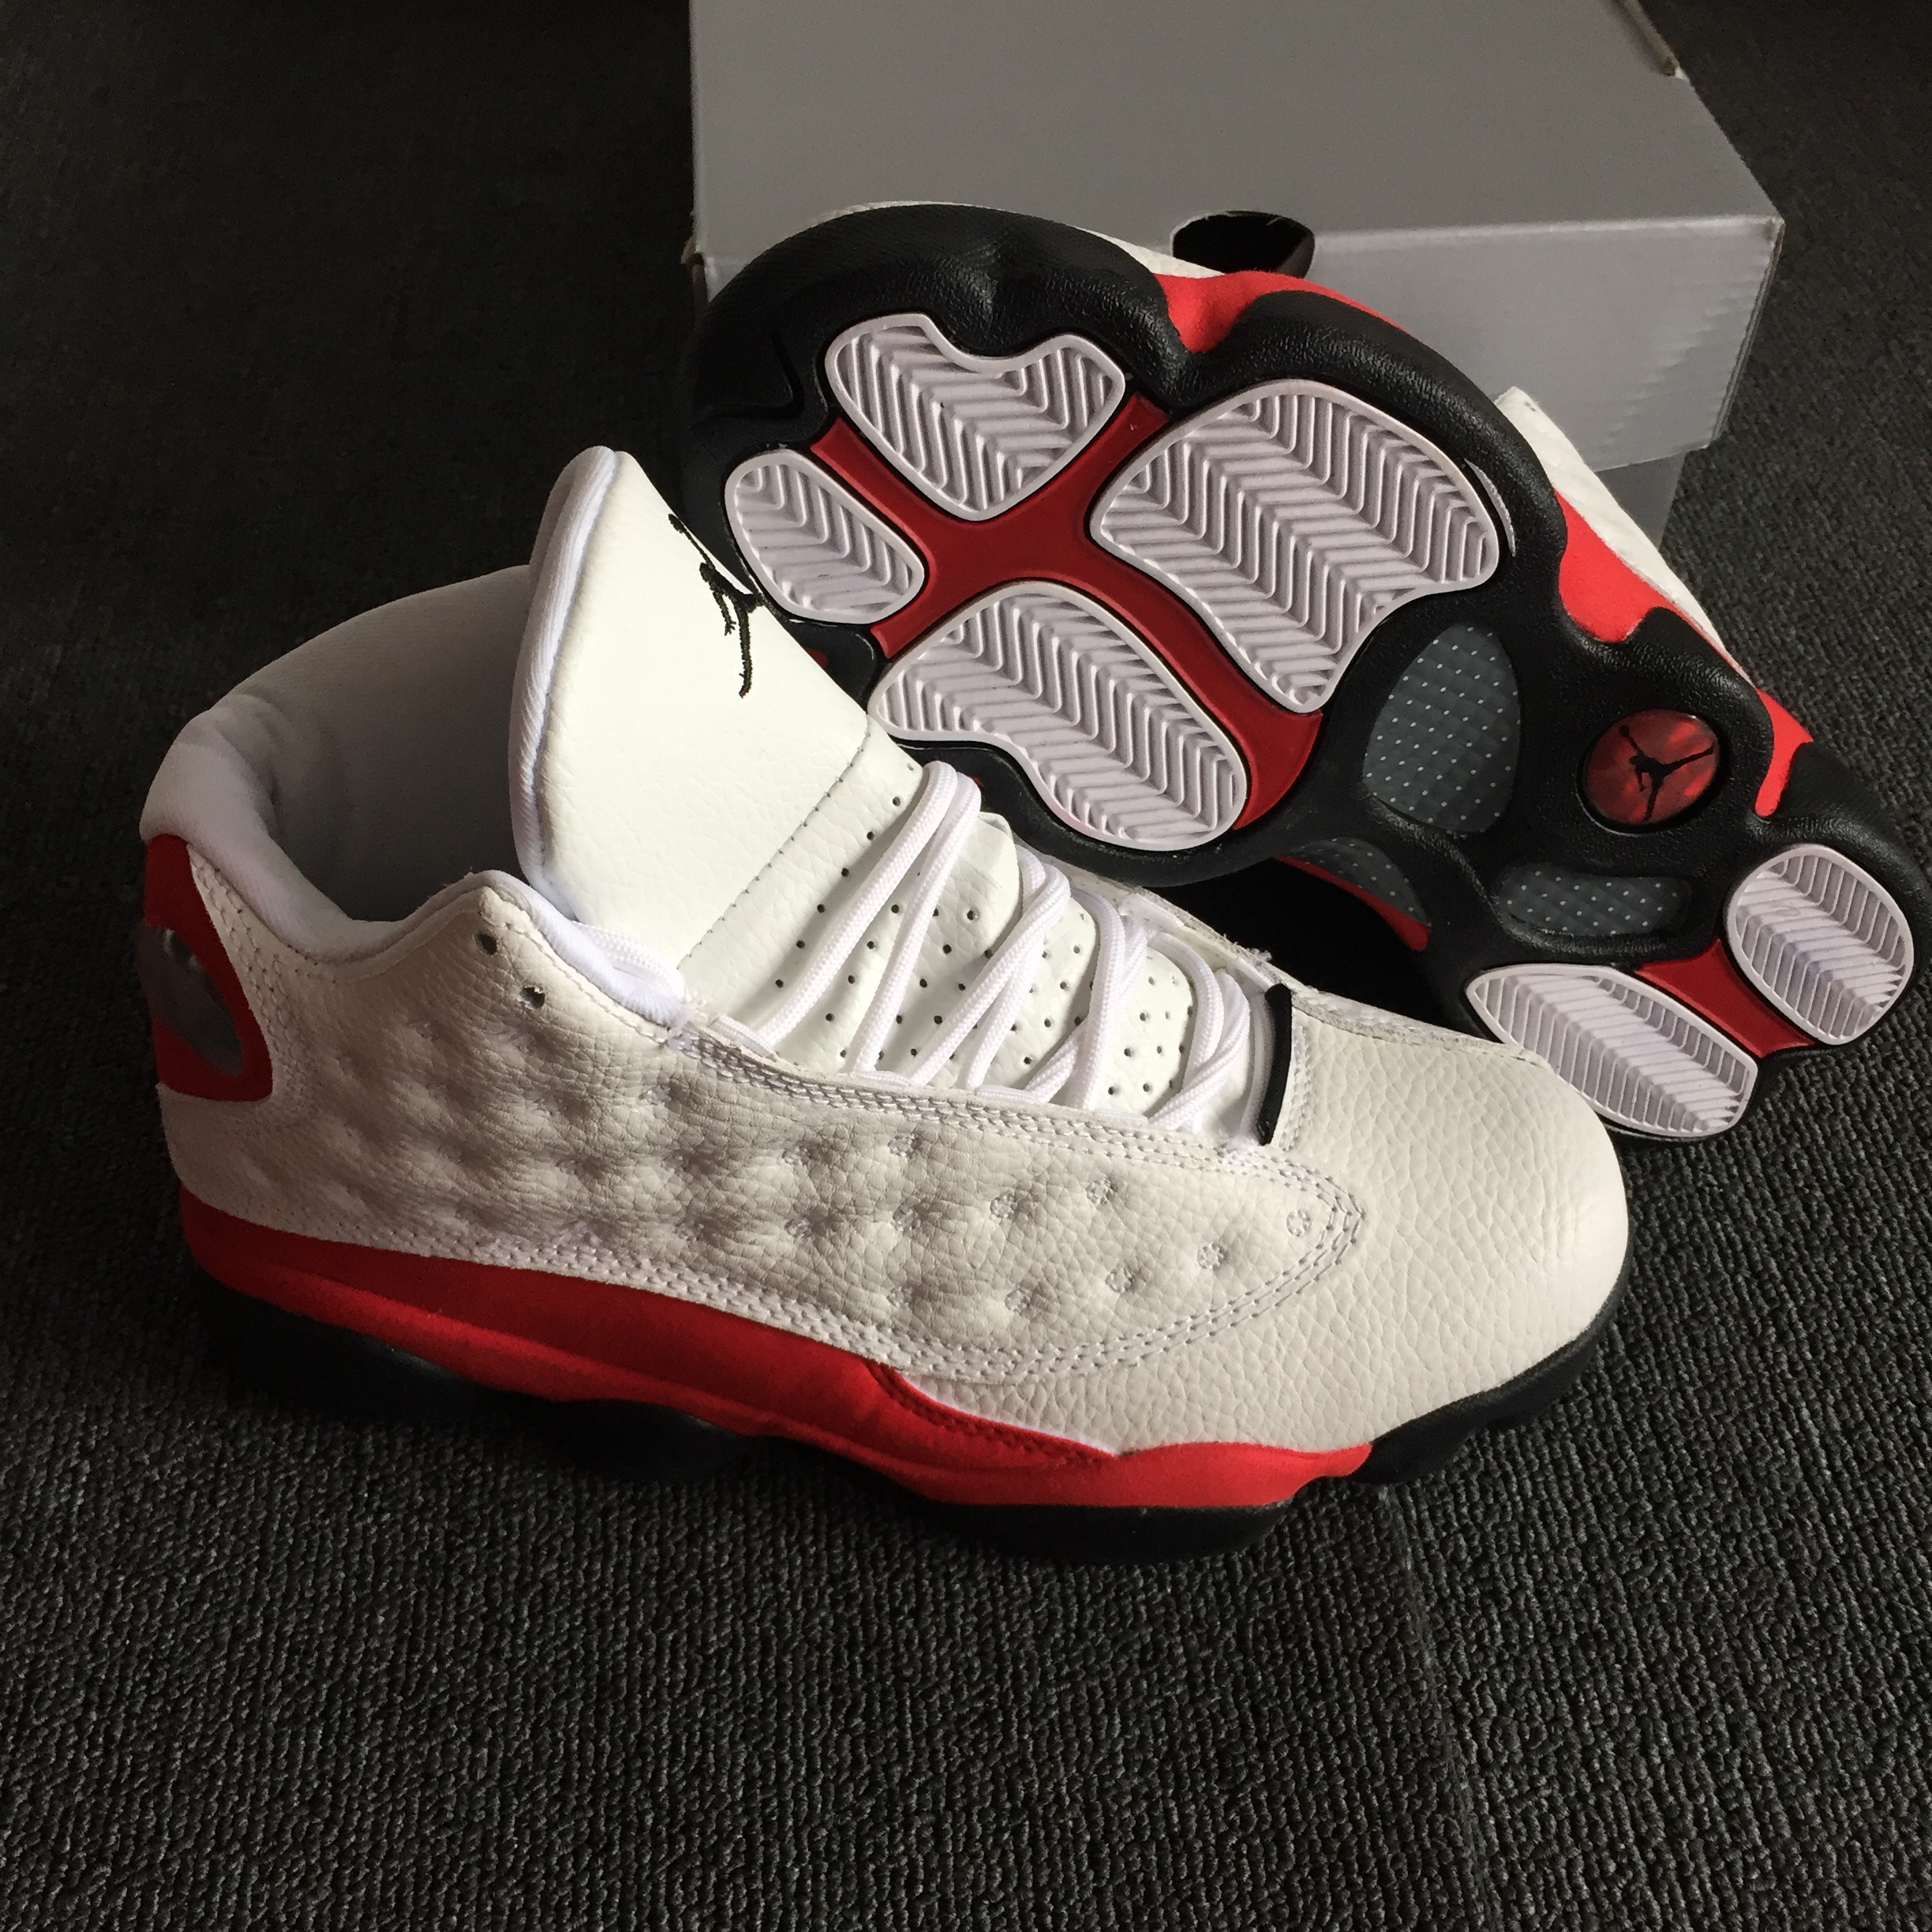 New Air Jordan 13 Chicago Red White Black Shoes - Click Image to Close